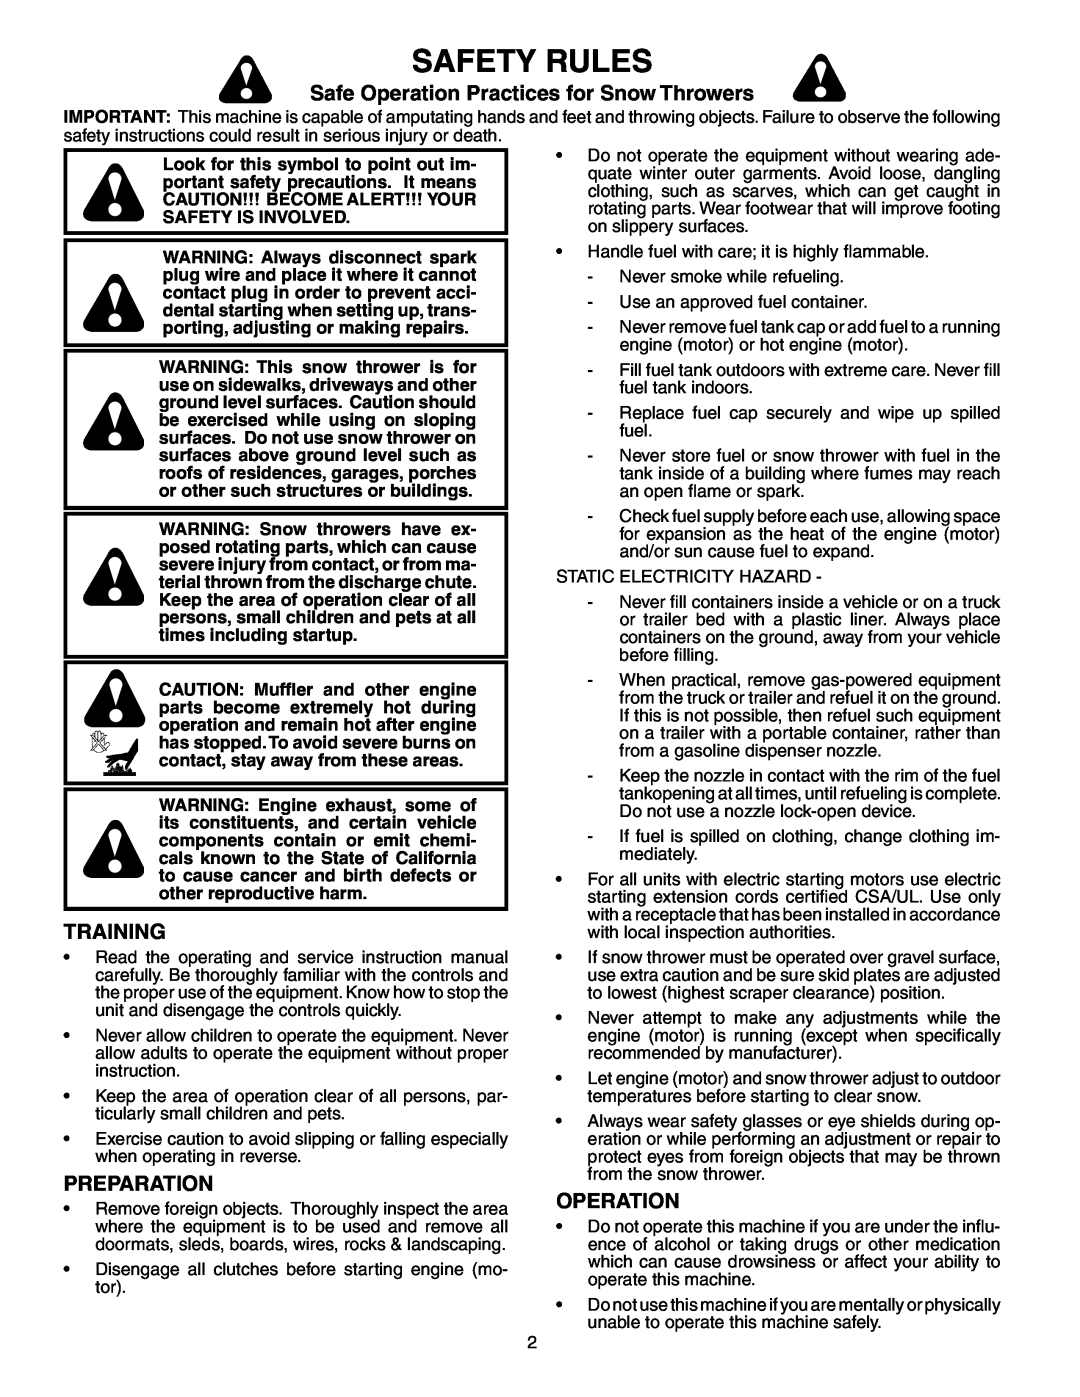 Poulan 192030 owner manual Safety Rules, Safe Operation Practices for Snow Throwers, Training, Preparation 